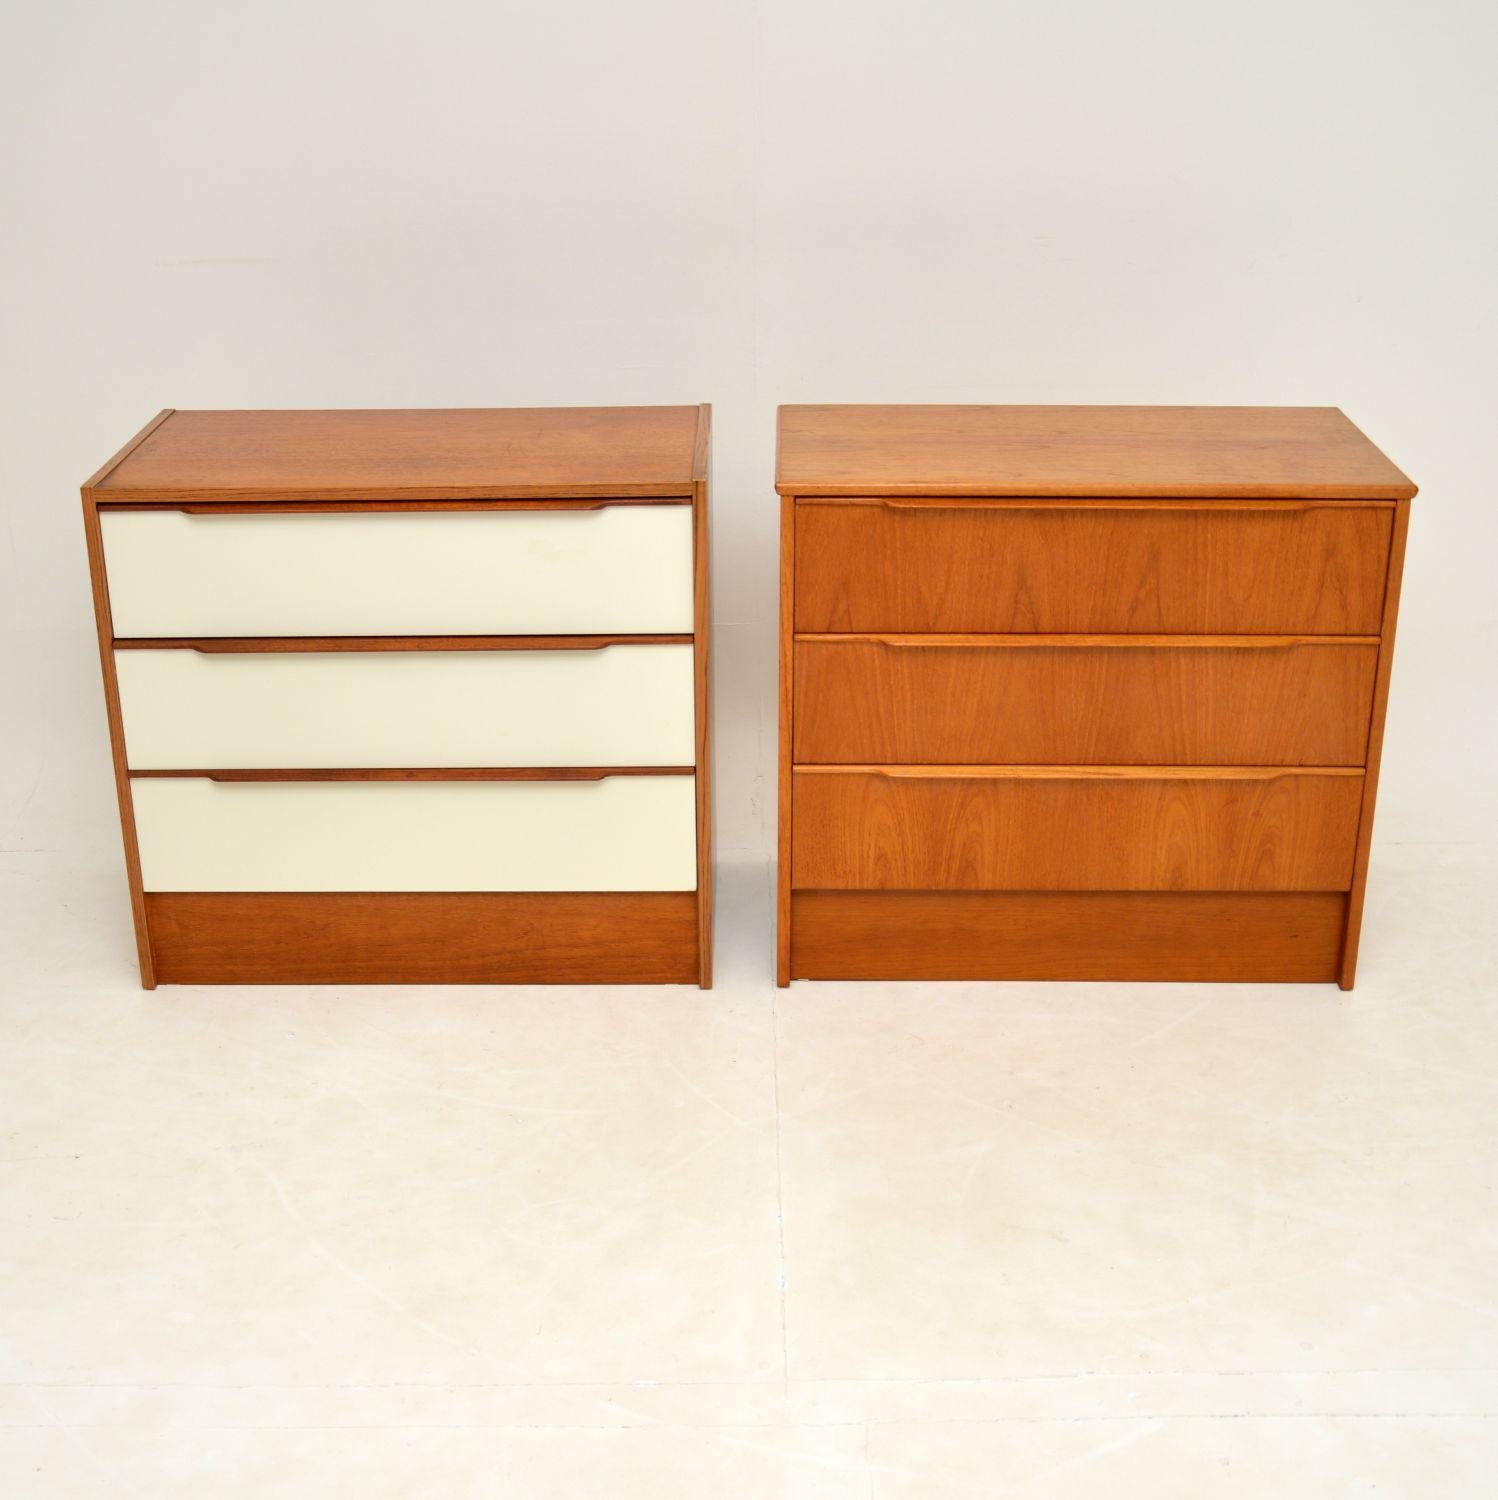 A fabulous pair of vintage Danish chests of drawers in teak. These were made in Denmark in the 1970’s by Steens.

They are identical in size and were made by the same company, one has white formica drawer fronts, the other is completely teak. They